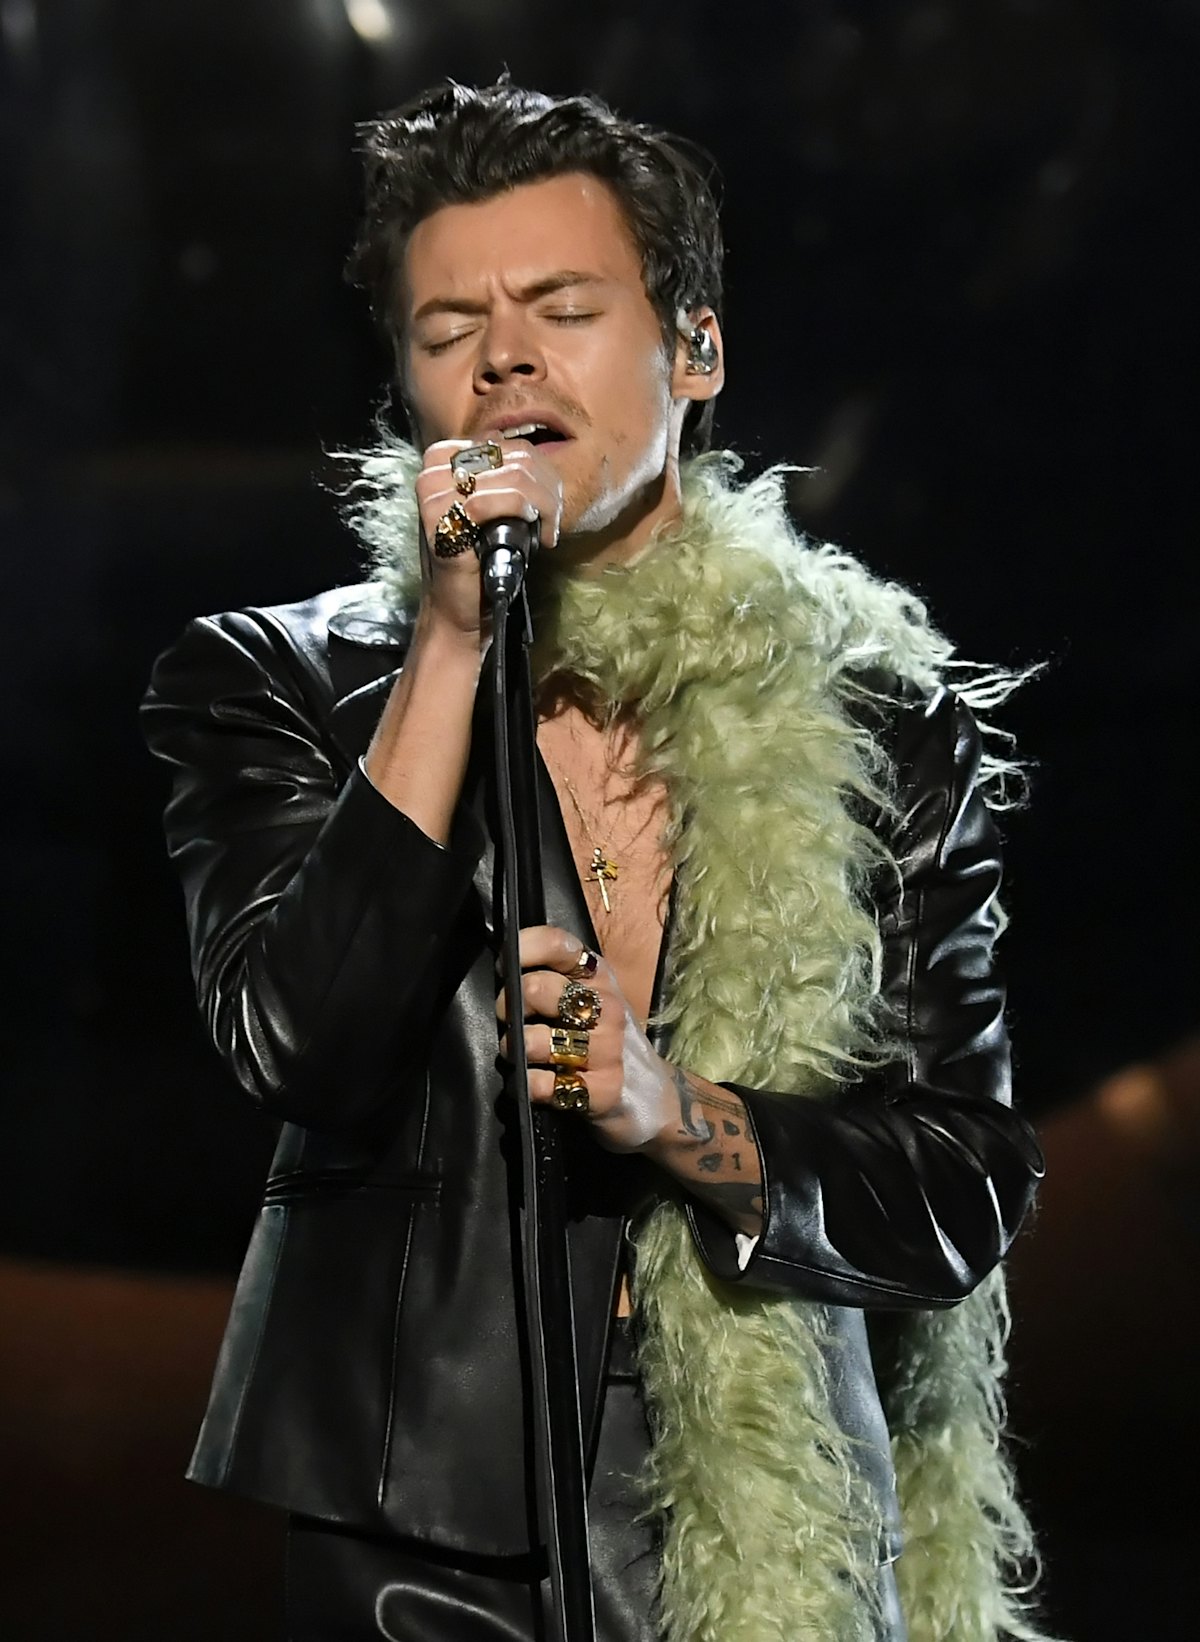 These are Harry Styles' most iconic tattoos.